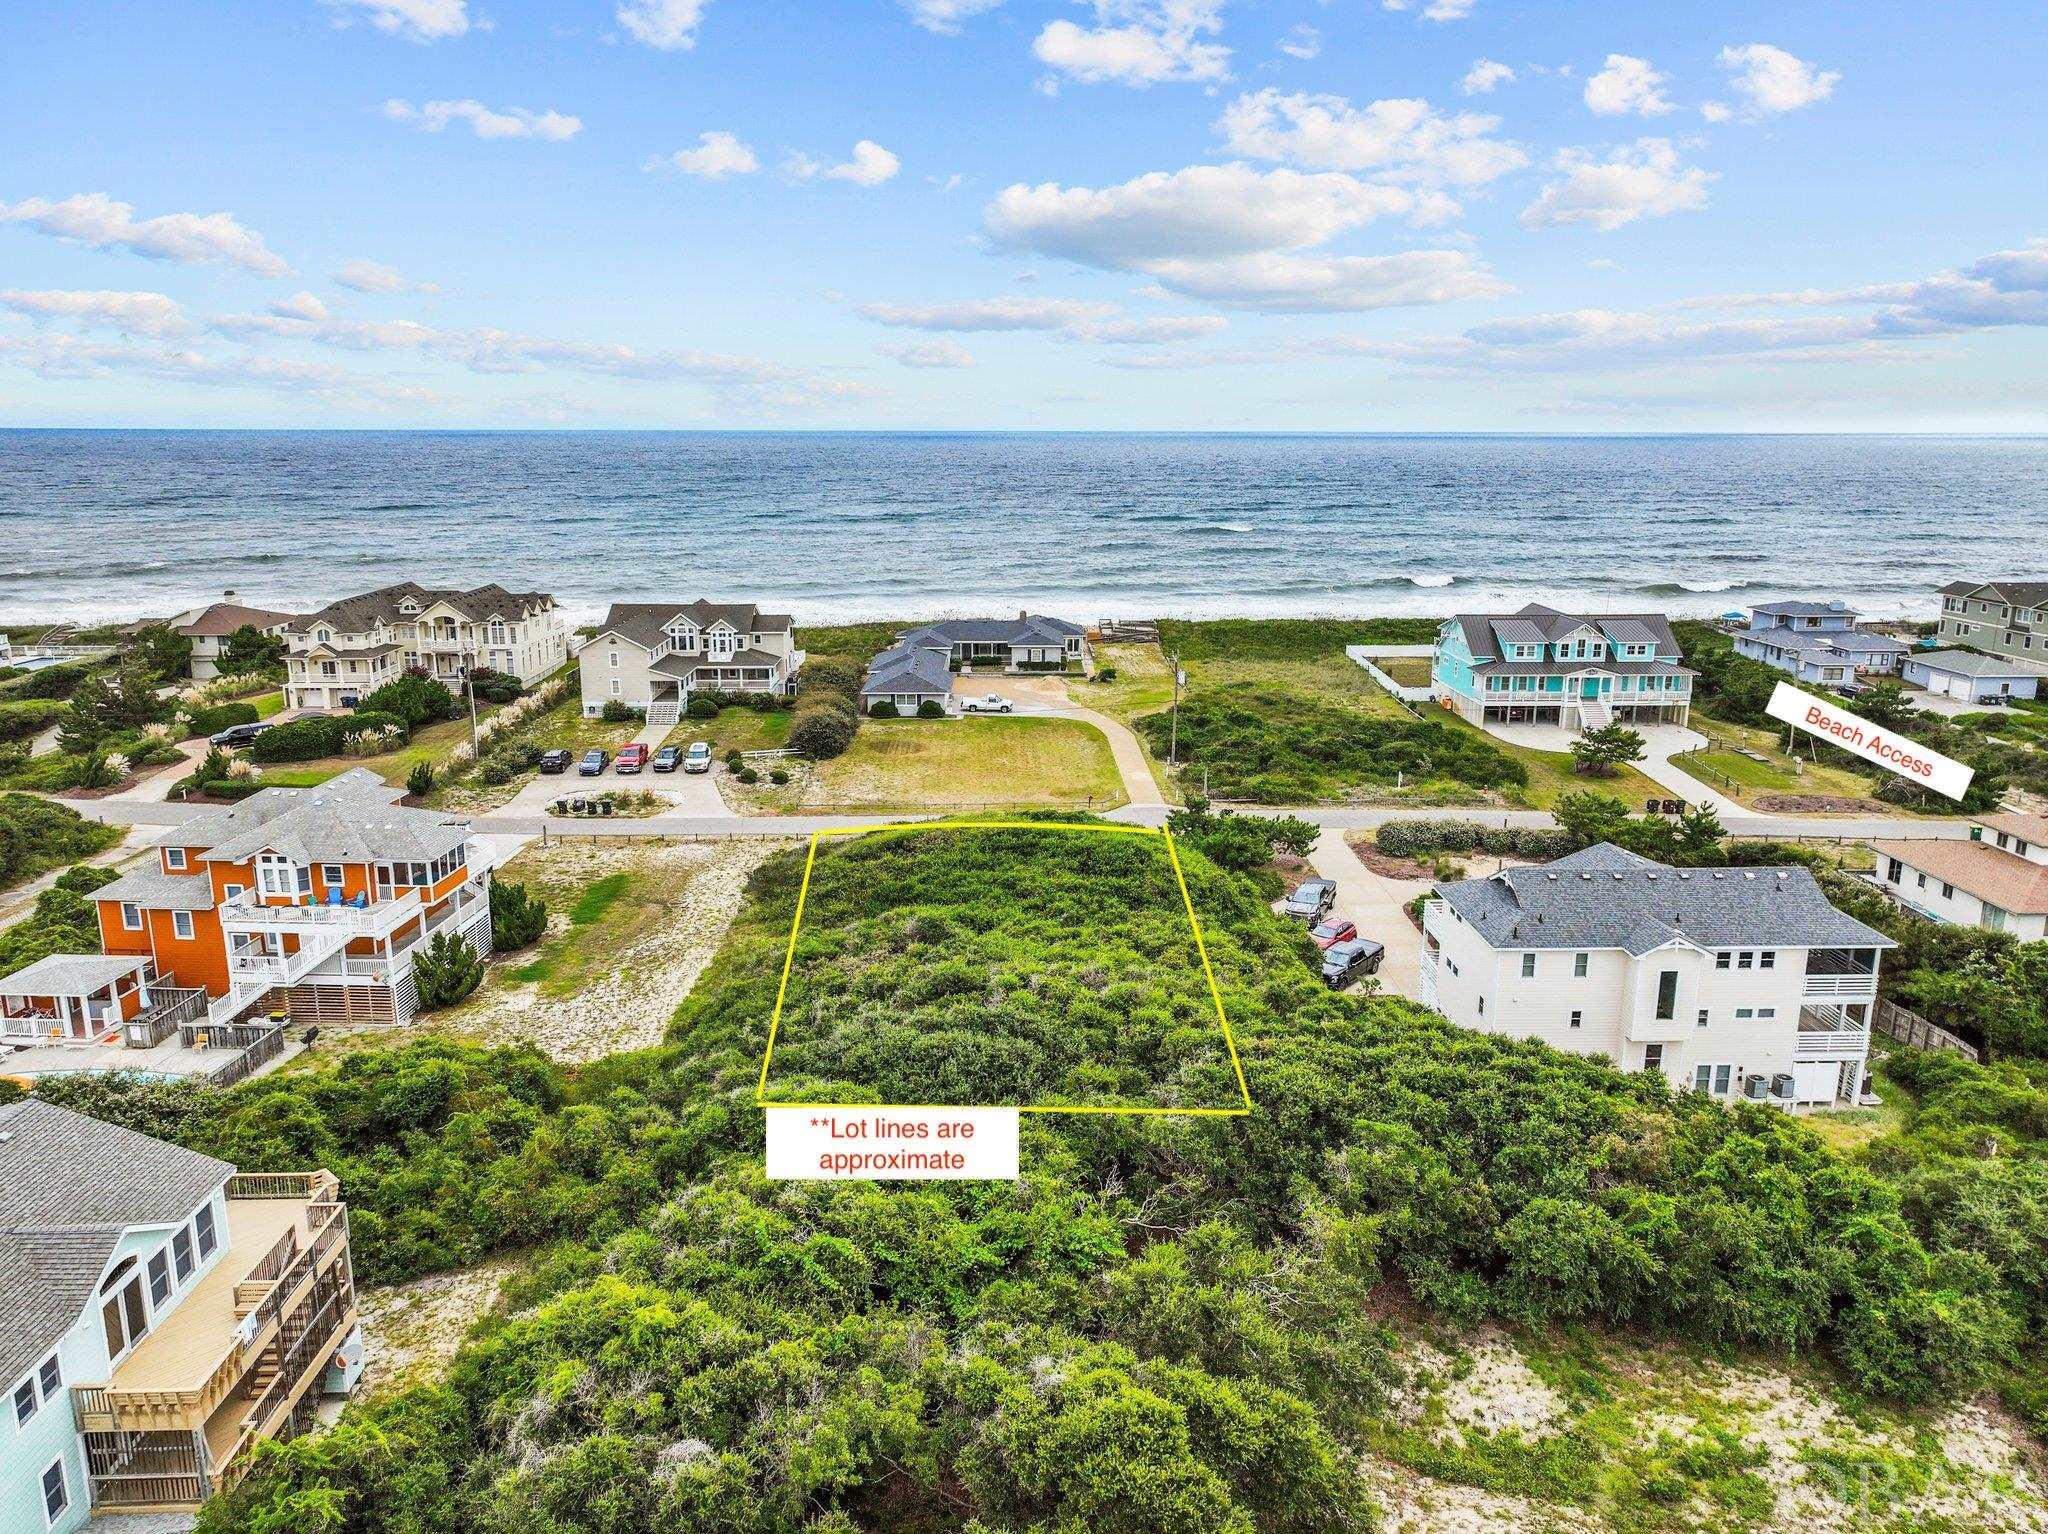 Why buy old when you can build new? A rare opportunity to build your vision and add to the already established, well appointed homes of Ocean Boulevard in Southern Shores. X Flood zone, 100' x 230' lot (see survey). Get the views and access without the oceanfront risk. A 5-7 minute walk south (500ft) to the beach access at Pompano Court. Join the voluntary Southern Shores Civic Association for additional amenities such as playgrounds, a marina, tennis courts, and sound front sunset viewing park. Start gathering your inspiration photos and back of the napkin drawings to make your building dreams a reality. Vacant lot survey available. Not sure about design? House plans available as well.